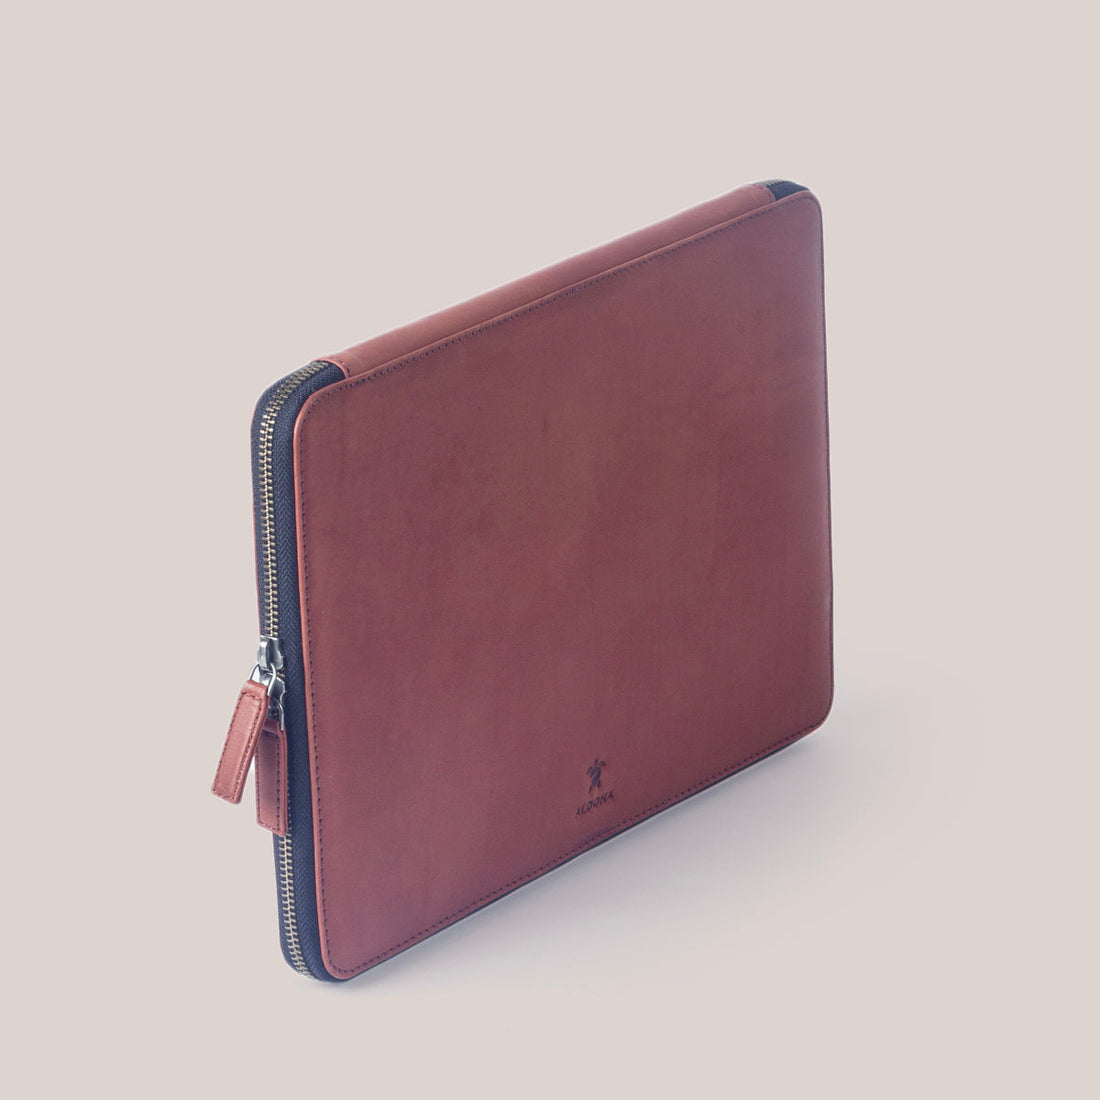 DELL XPS 17 Zippered Laptop Case - Burnt Tobacco